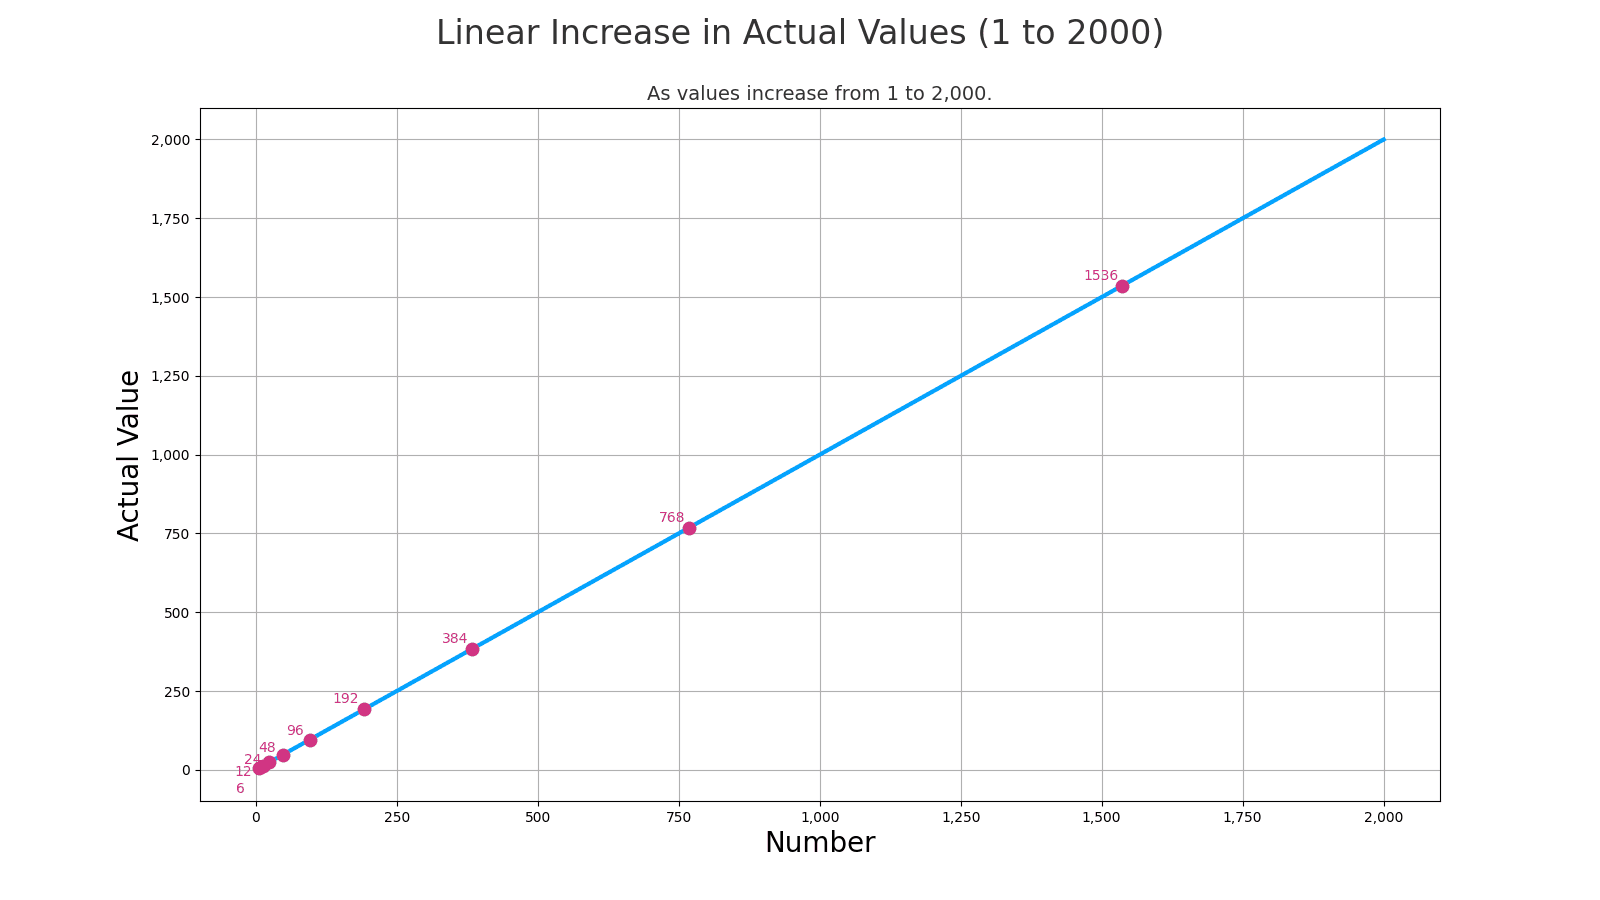 Linear growth to 2,000.